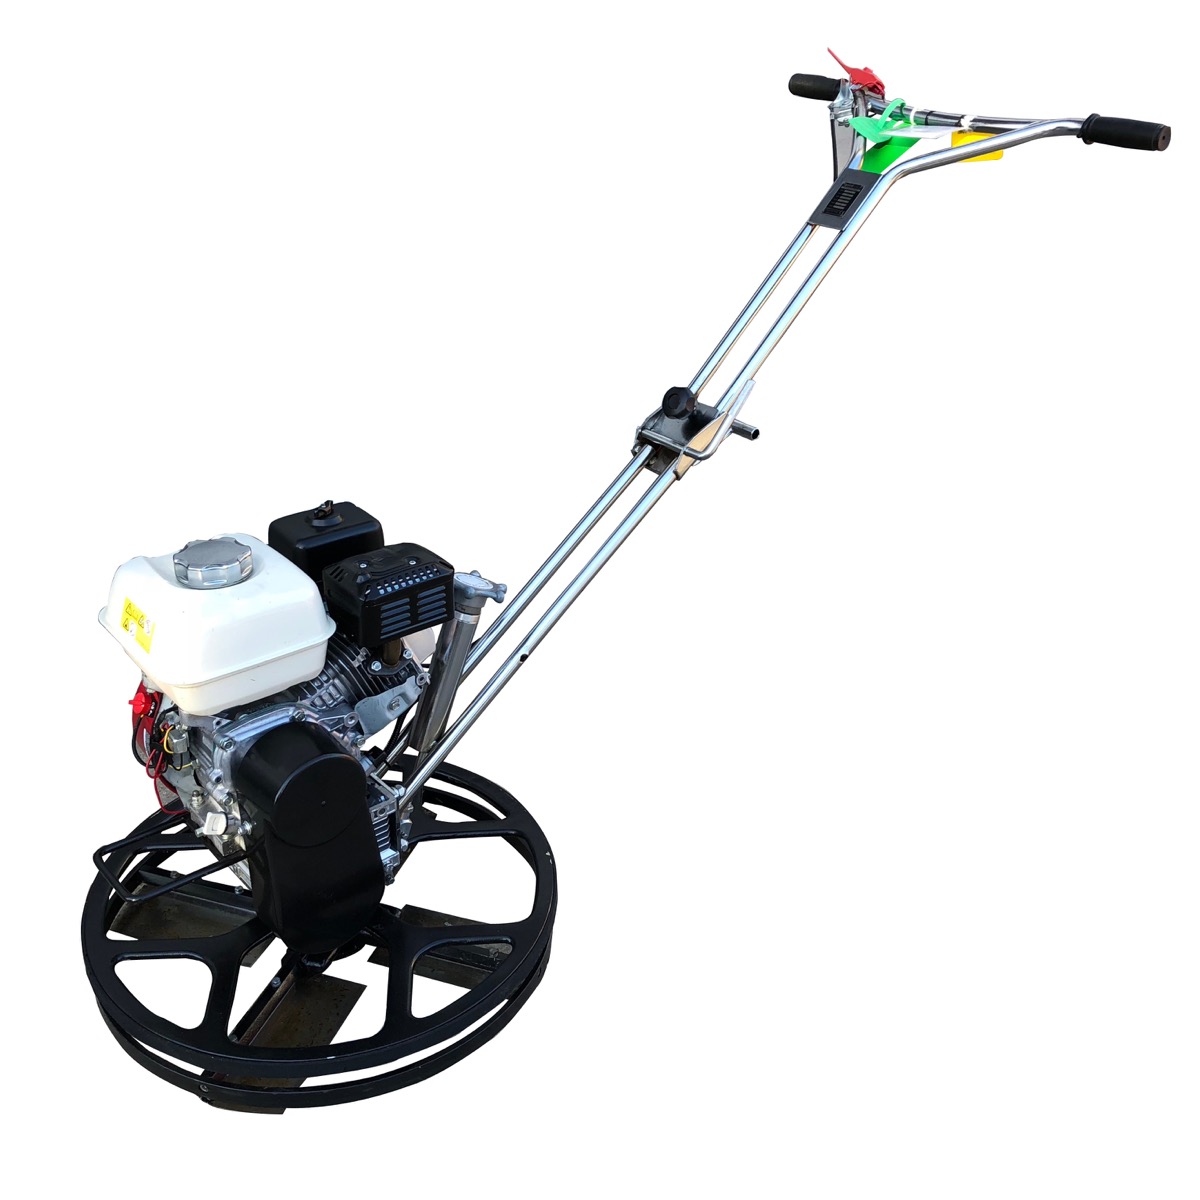 For edge power floating, the Moskito 24 is a manual starter petrol Honda engine. Avail to hire from Speedcrete, United Kingdom. Concrete flooring specialists.